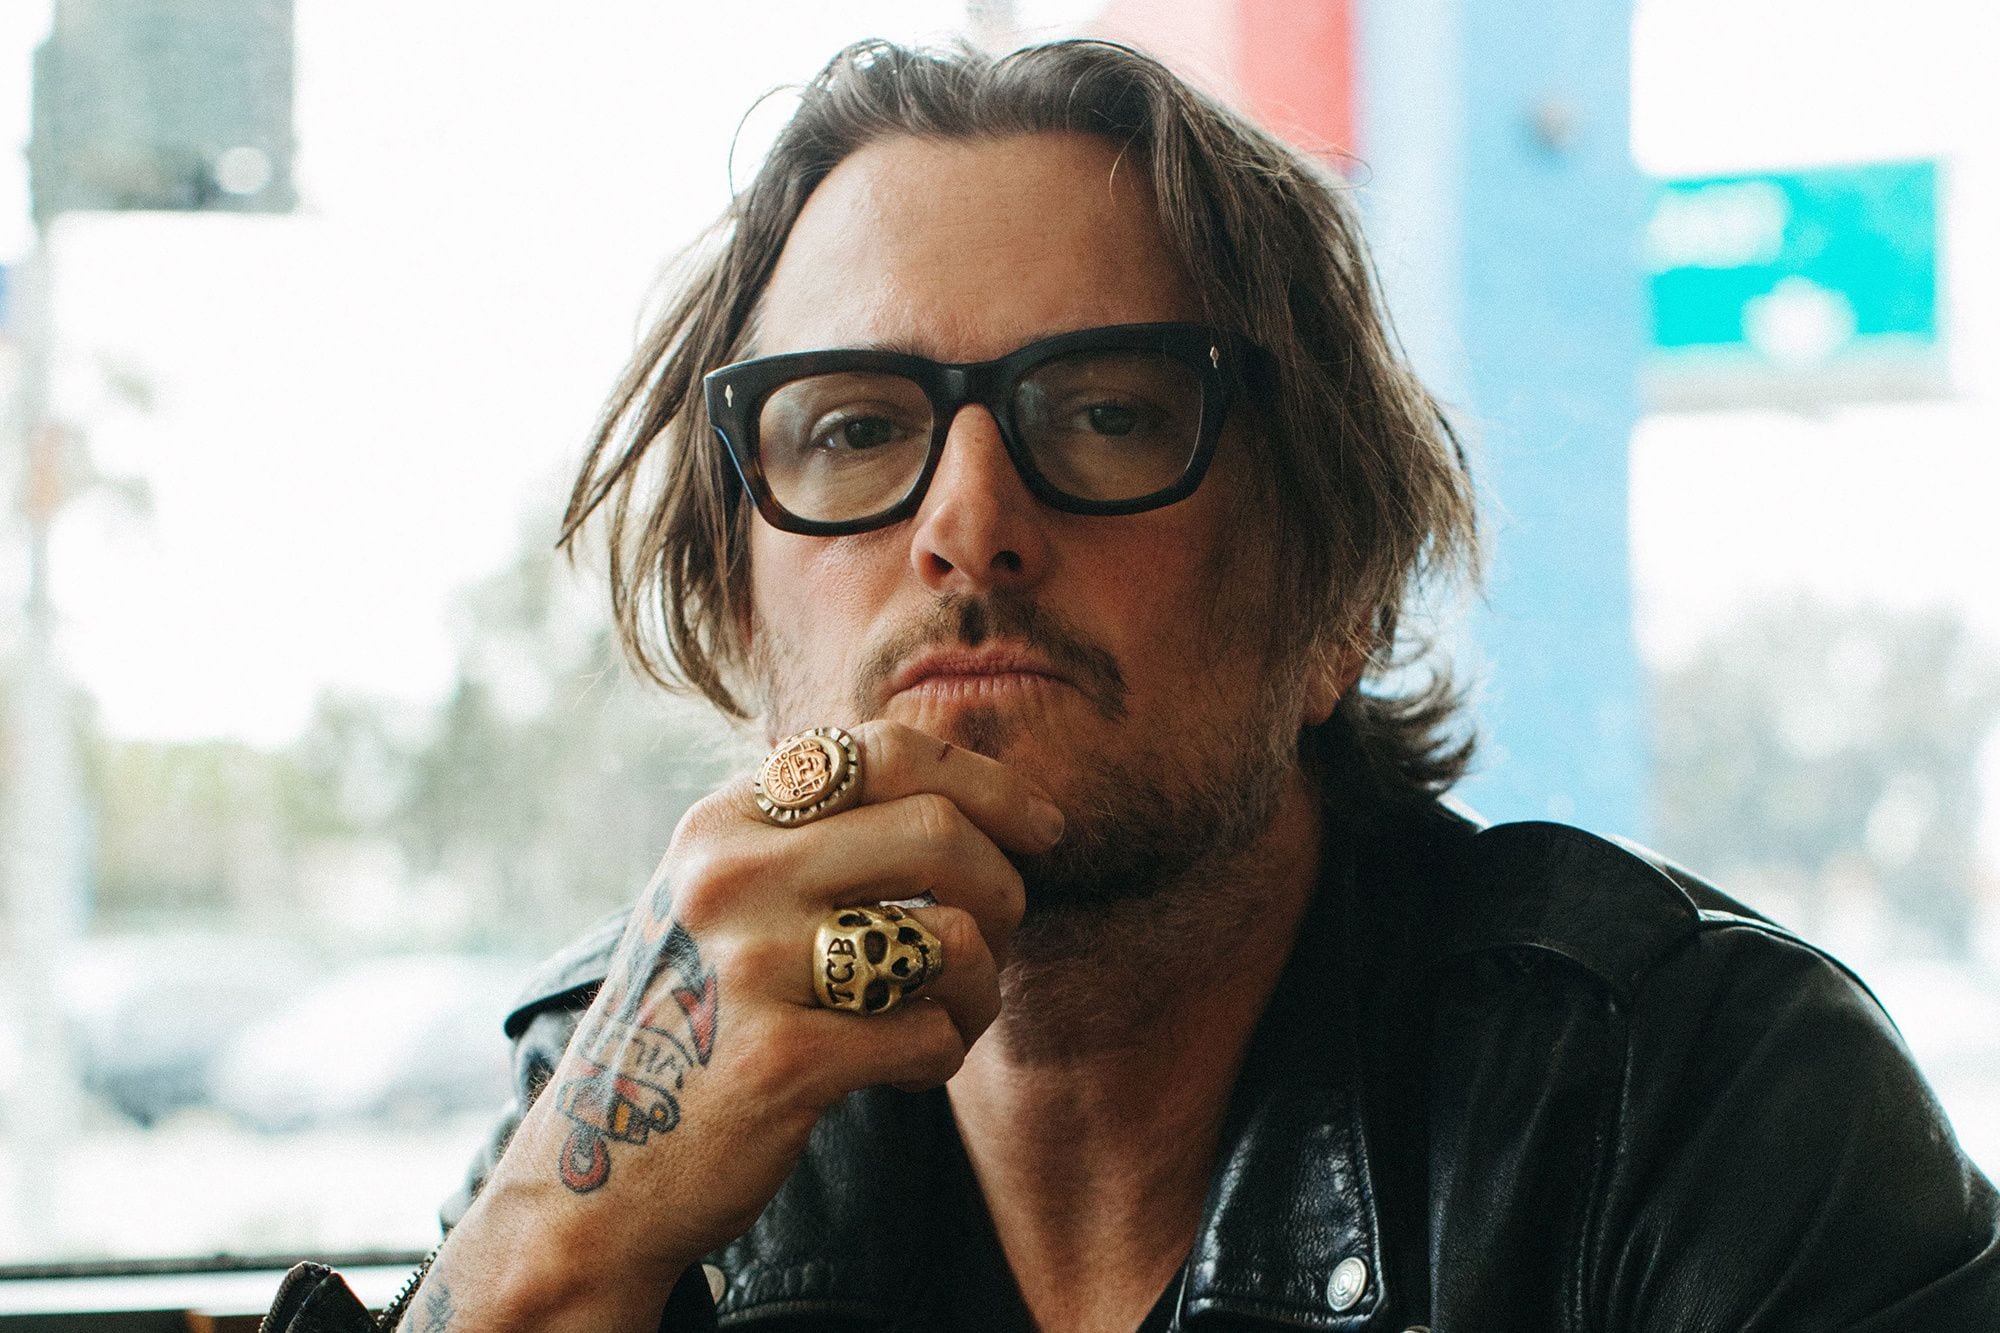 Are We Having a Conversation? An Interview With Butch Walker